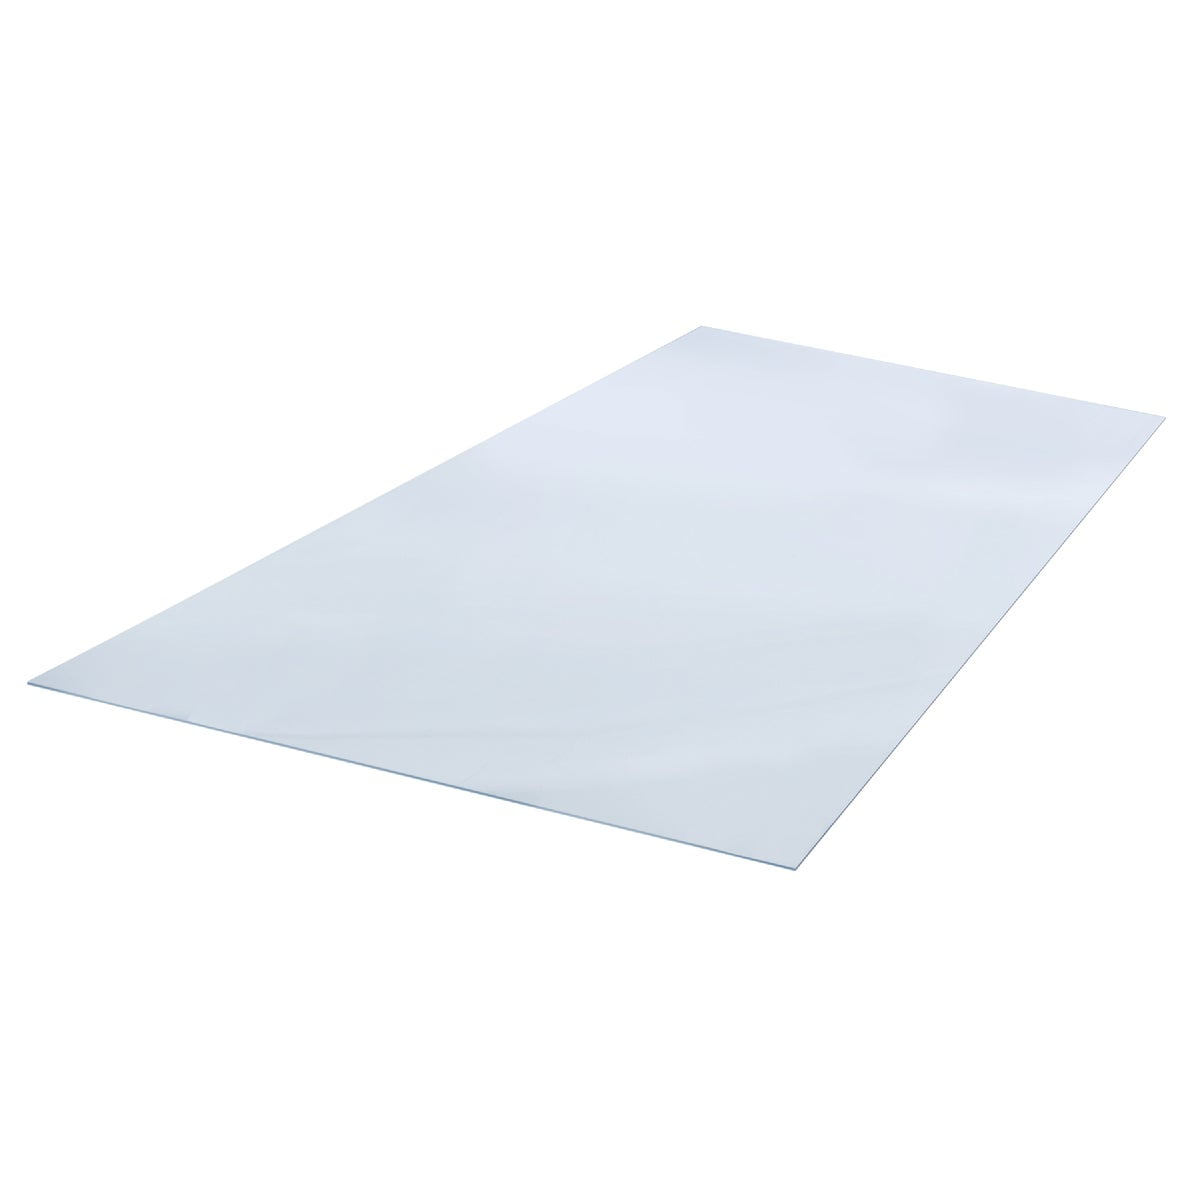 Clear 24 x 24 Nominal Lexan Sheet Polycarbonate .118-1/8 Thick